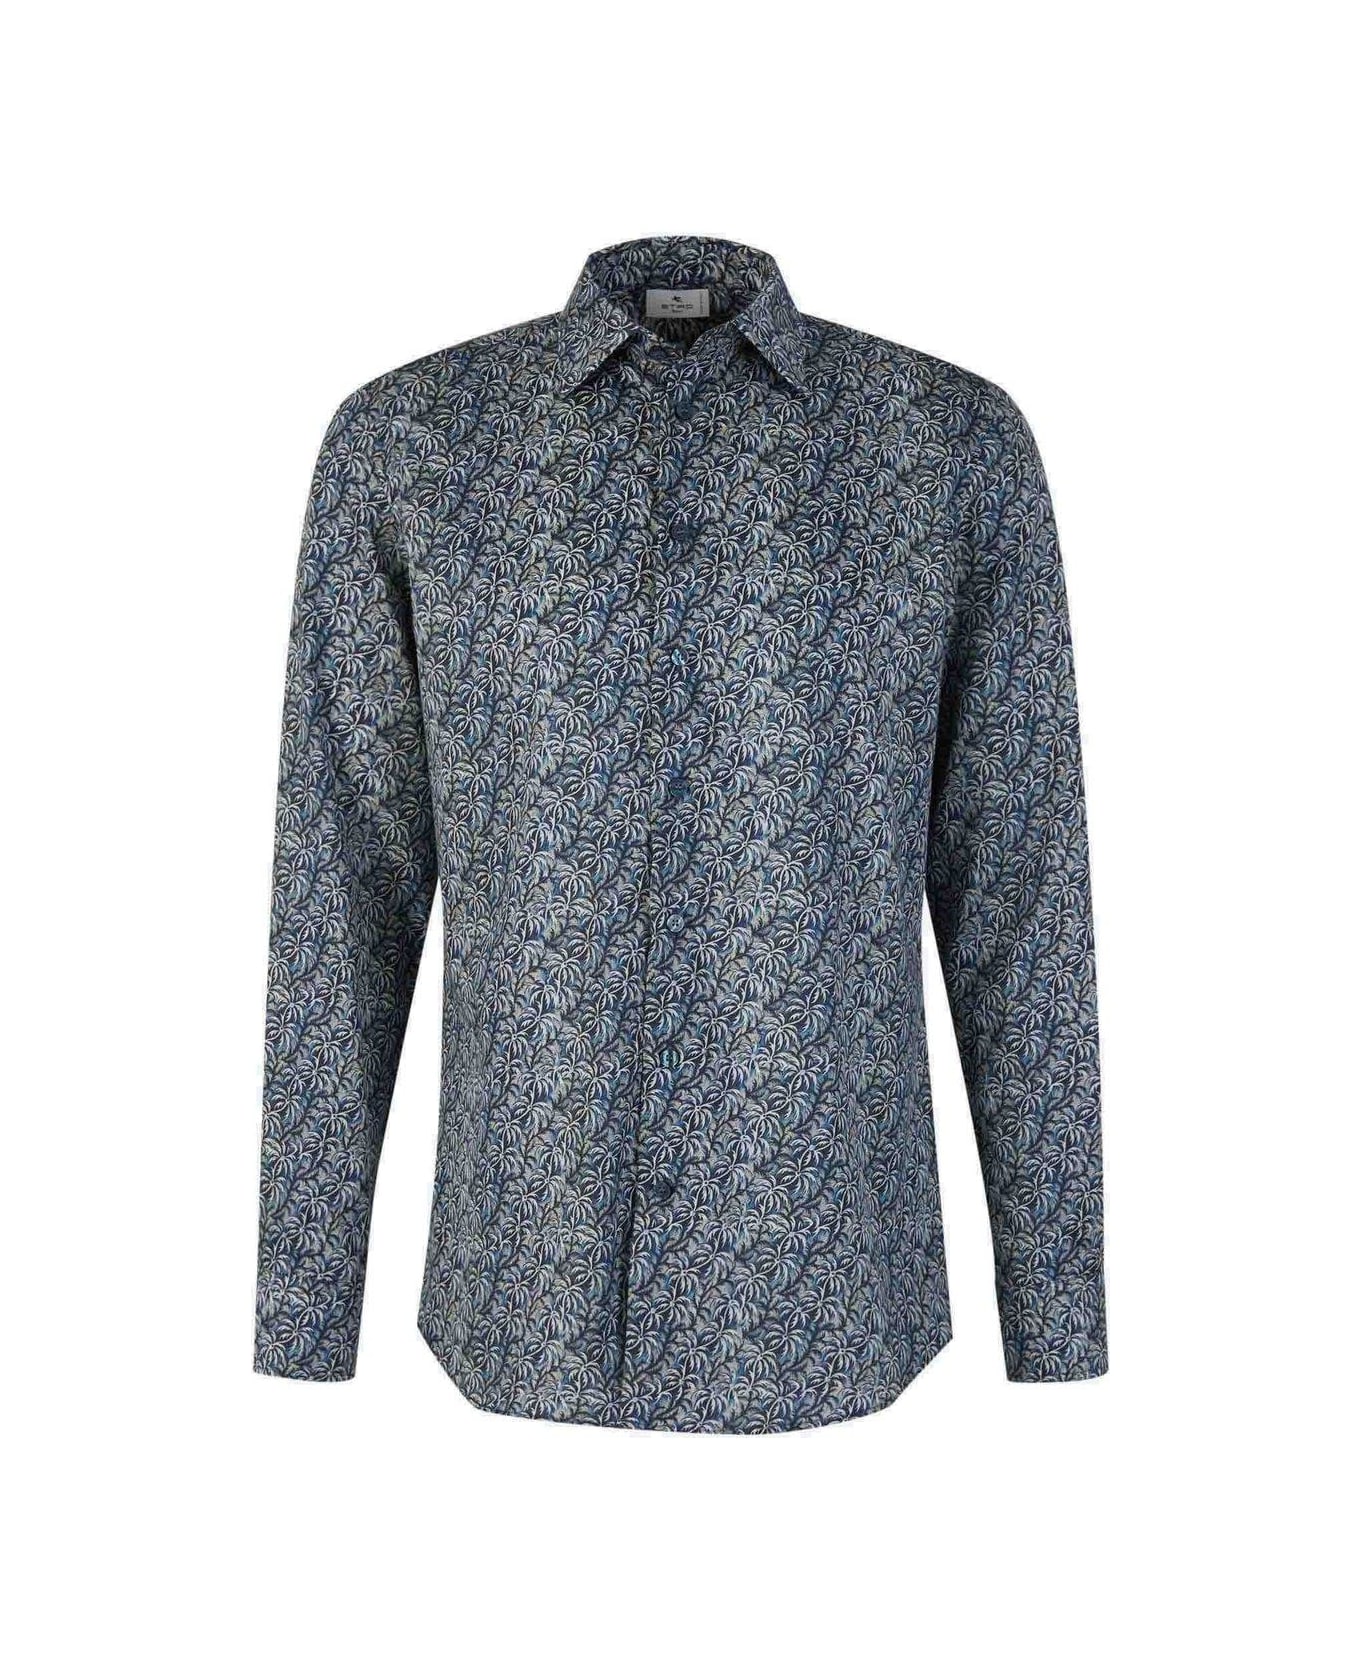 Etro Allover Printed Long-sleeved Shirt - Stampa f.do azzurro